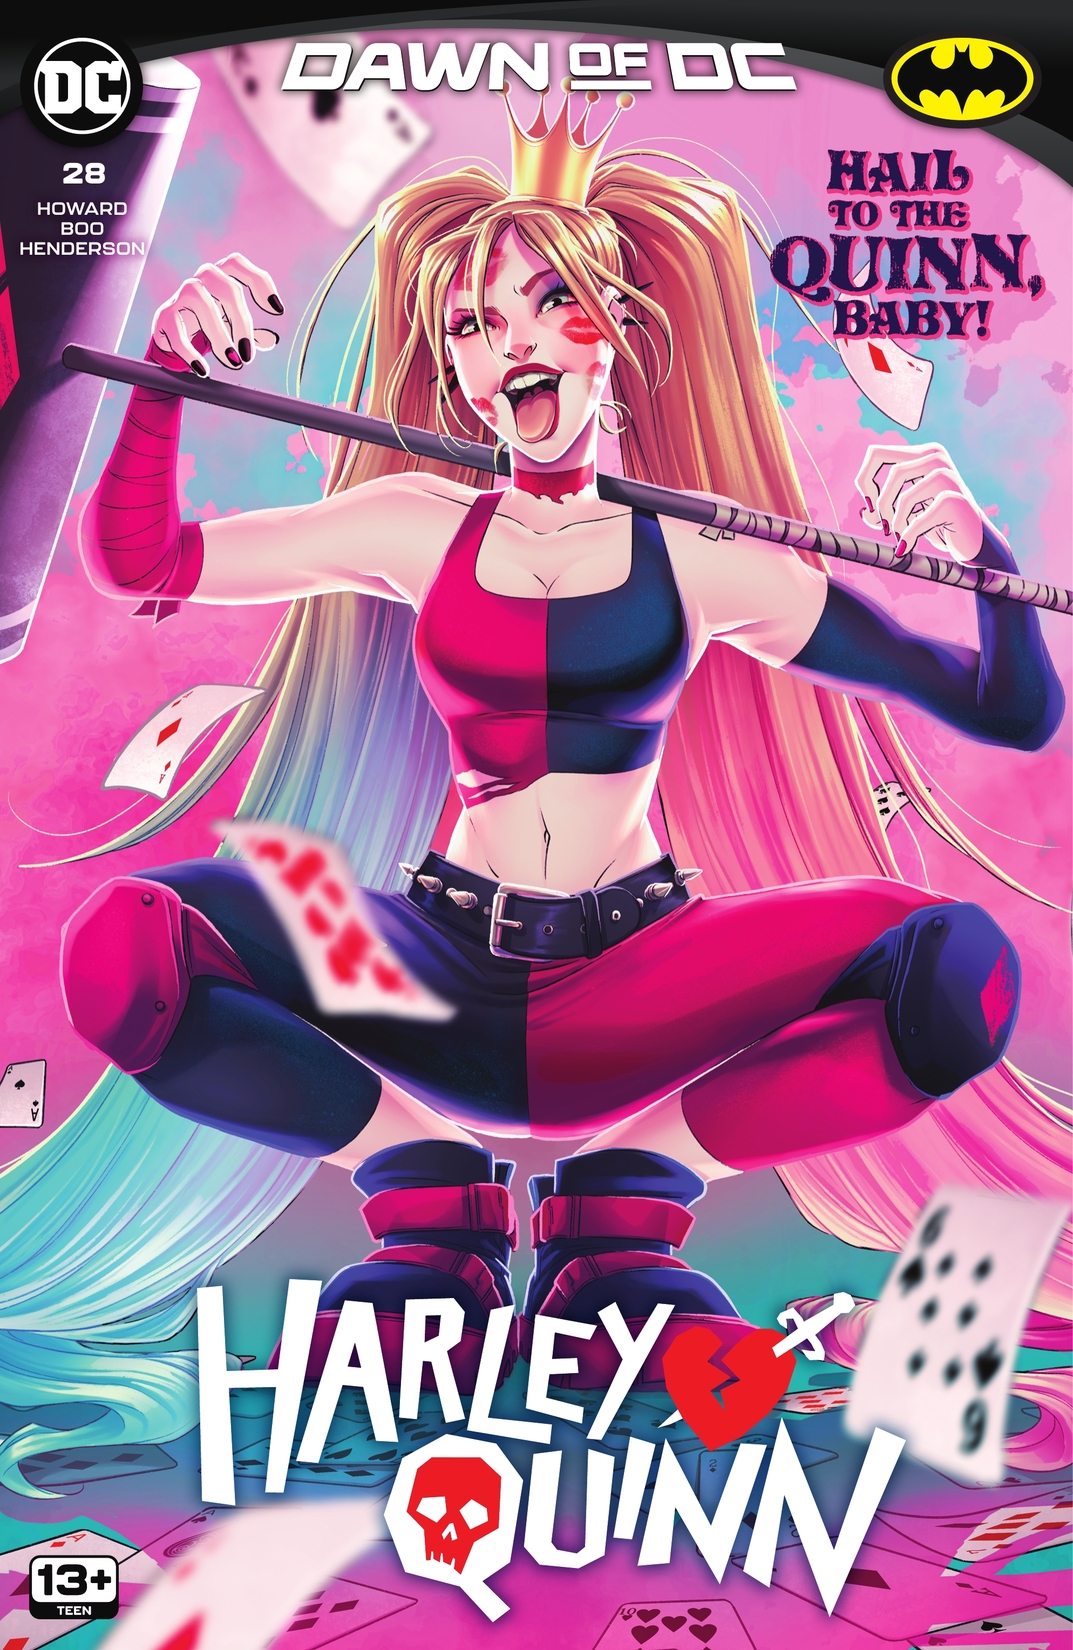 Harley Quinn #28 preview images